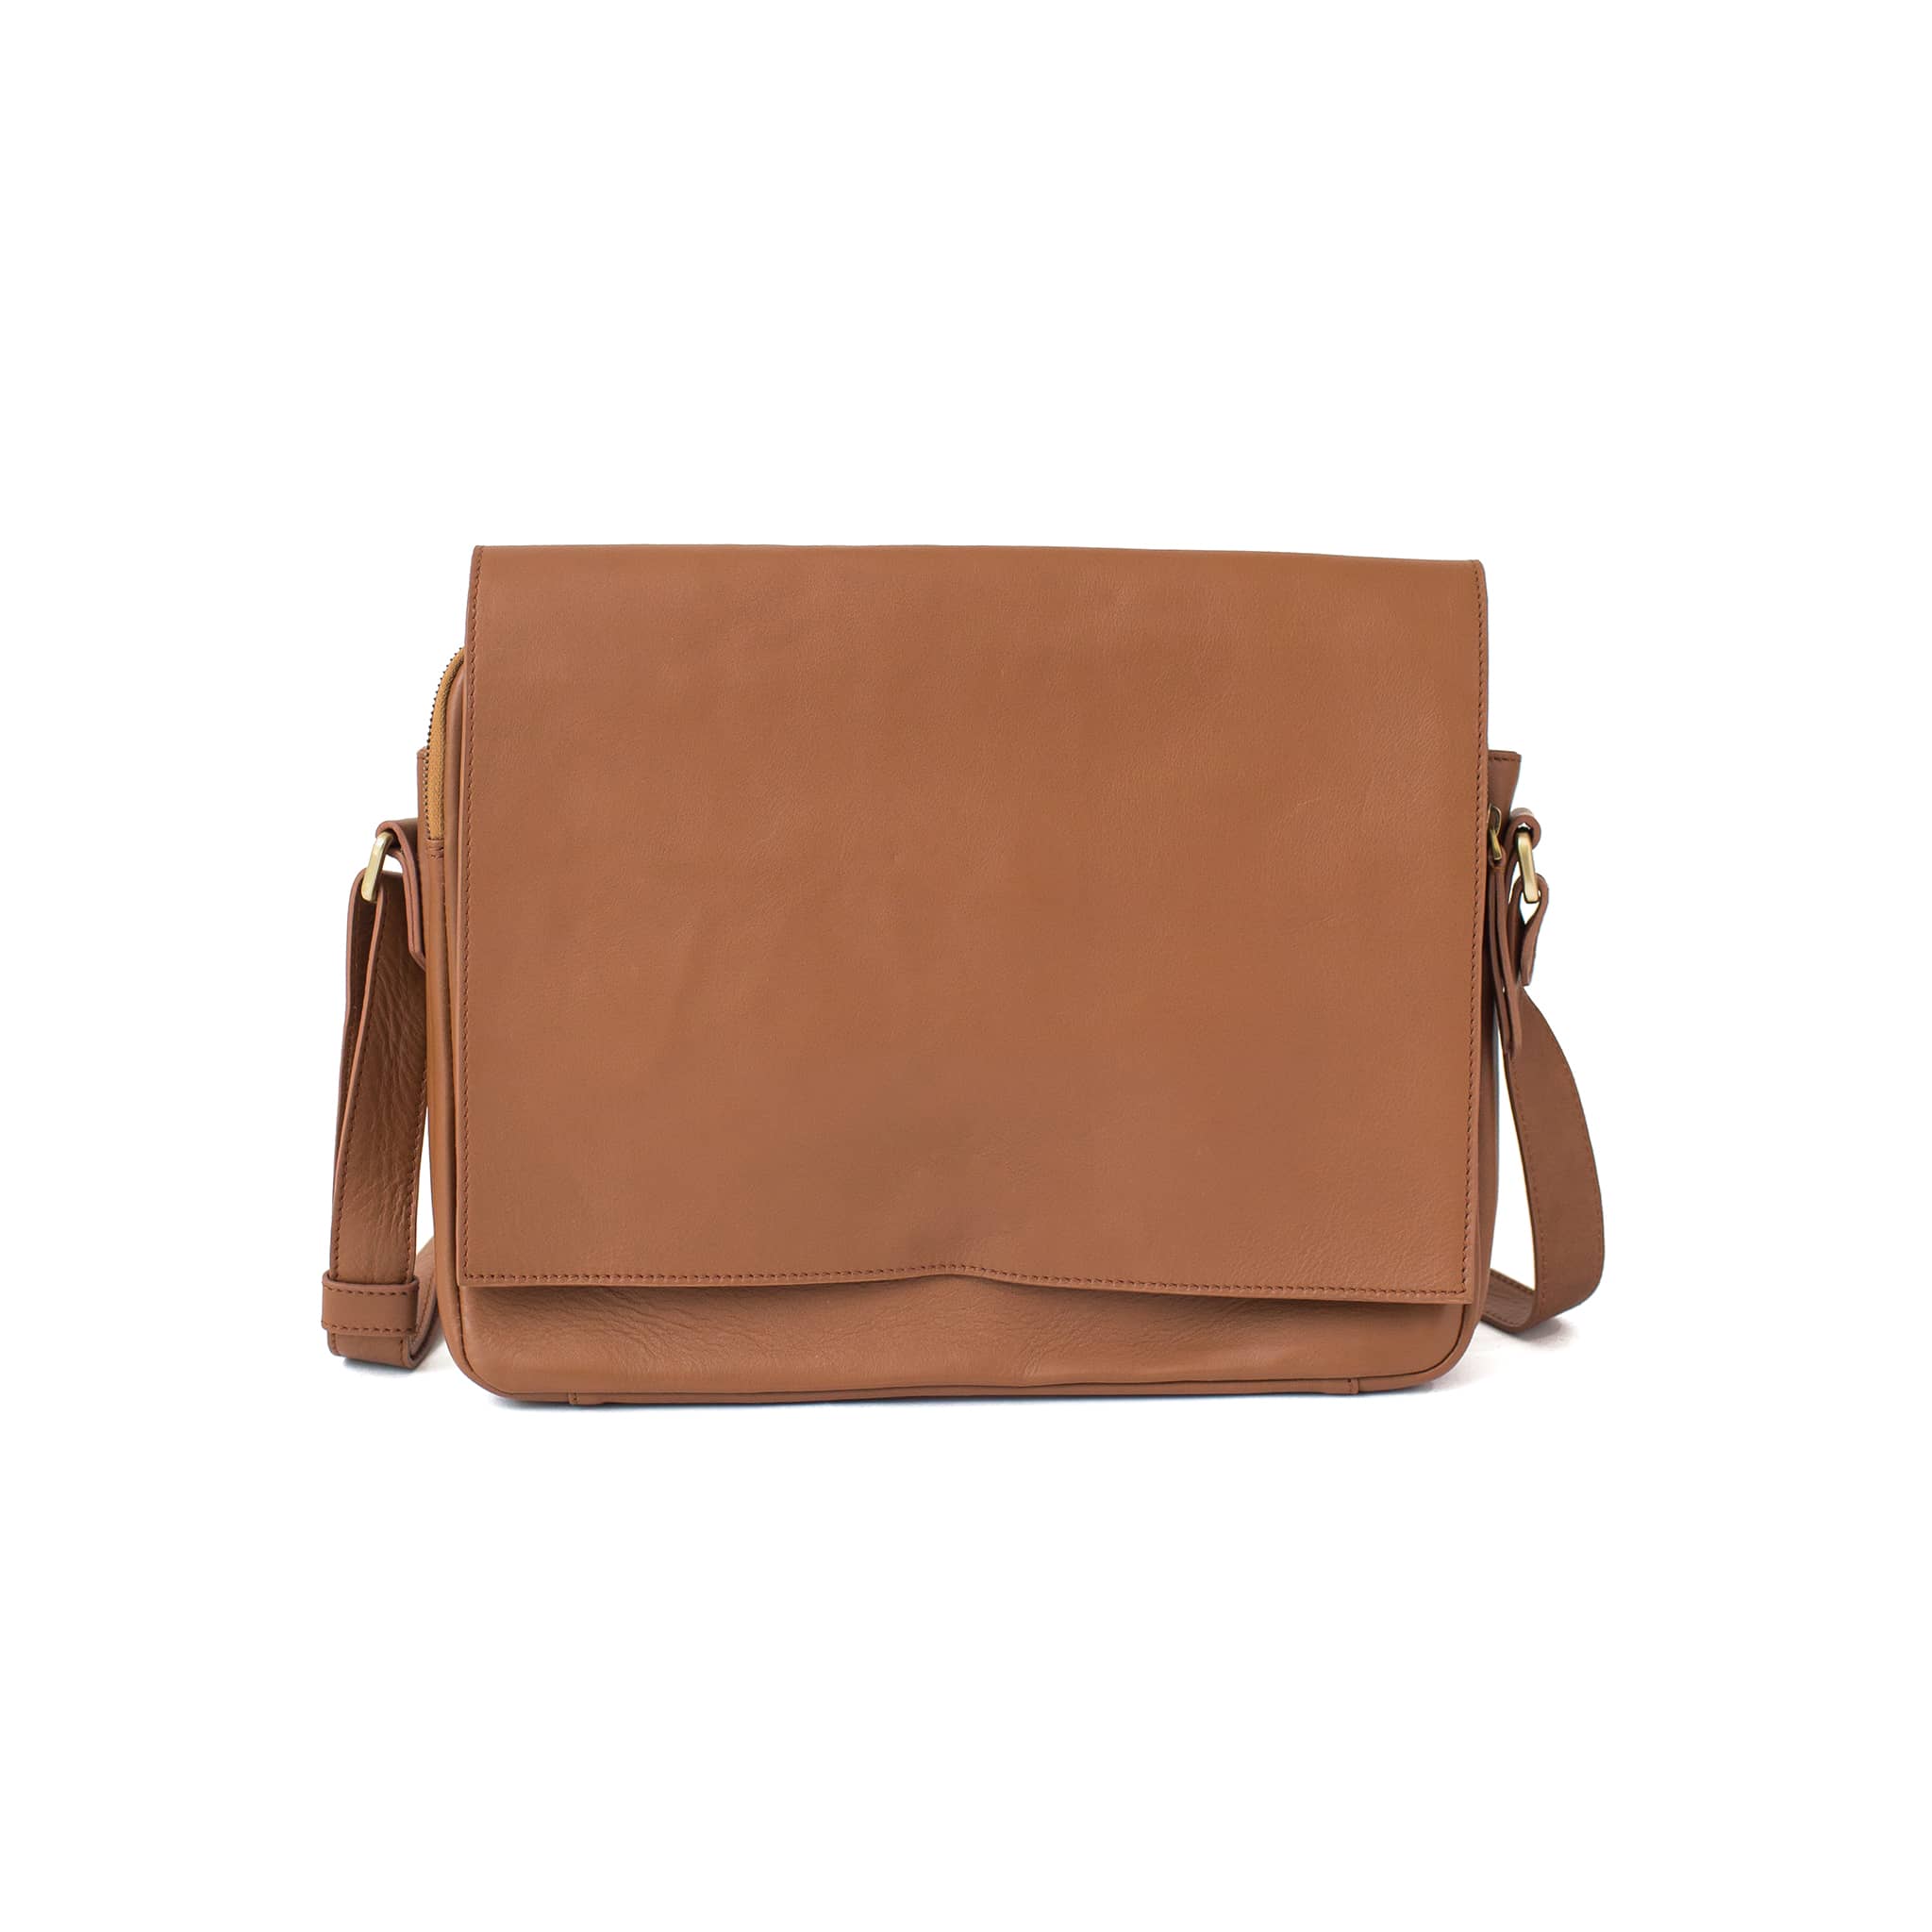 Ford messenger tan leather unisex bag in classic cognac brown oil Leather has a minimal style.